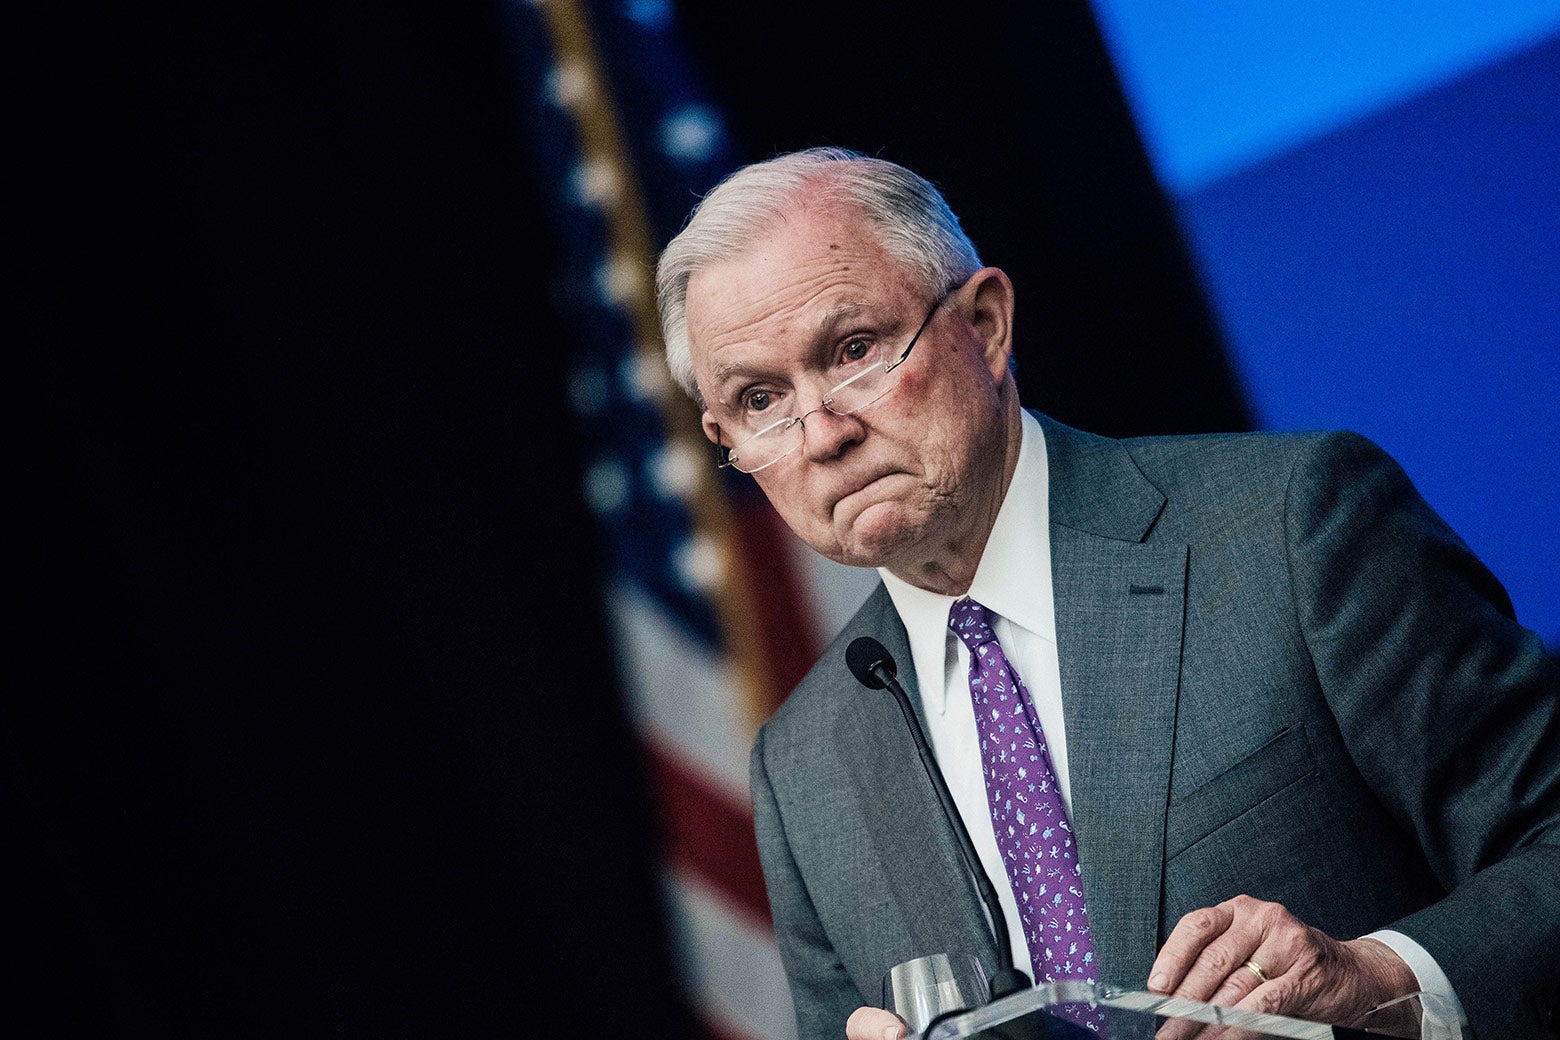 Attorney General Jeff Sessions looks as he addresses the National Sheriffs' Association in Washington on May 3.